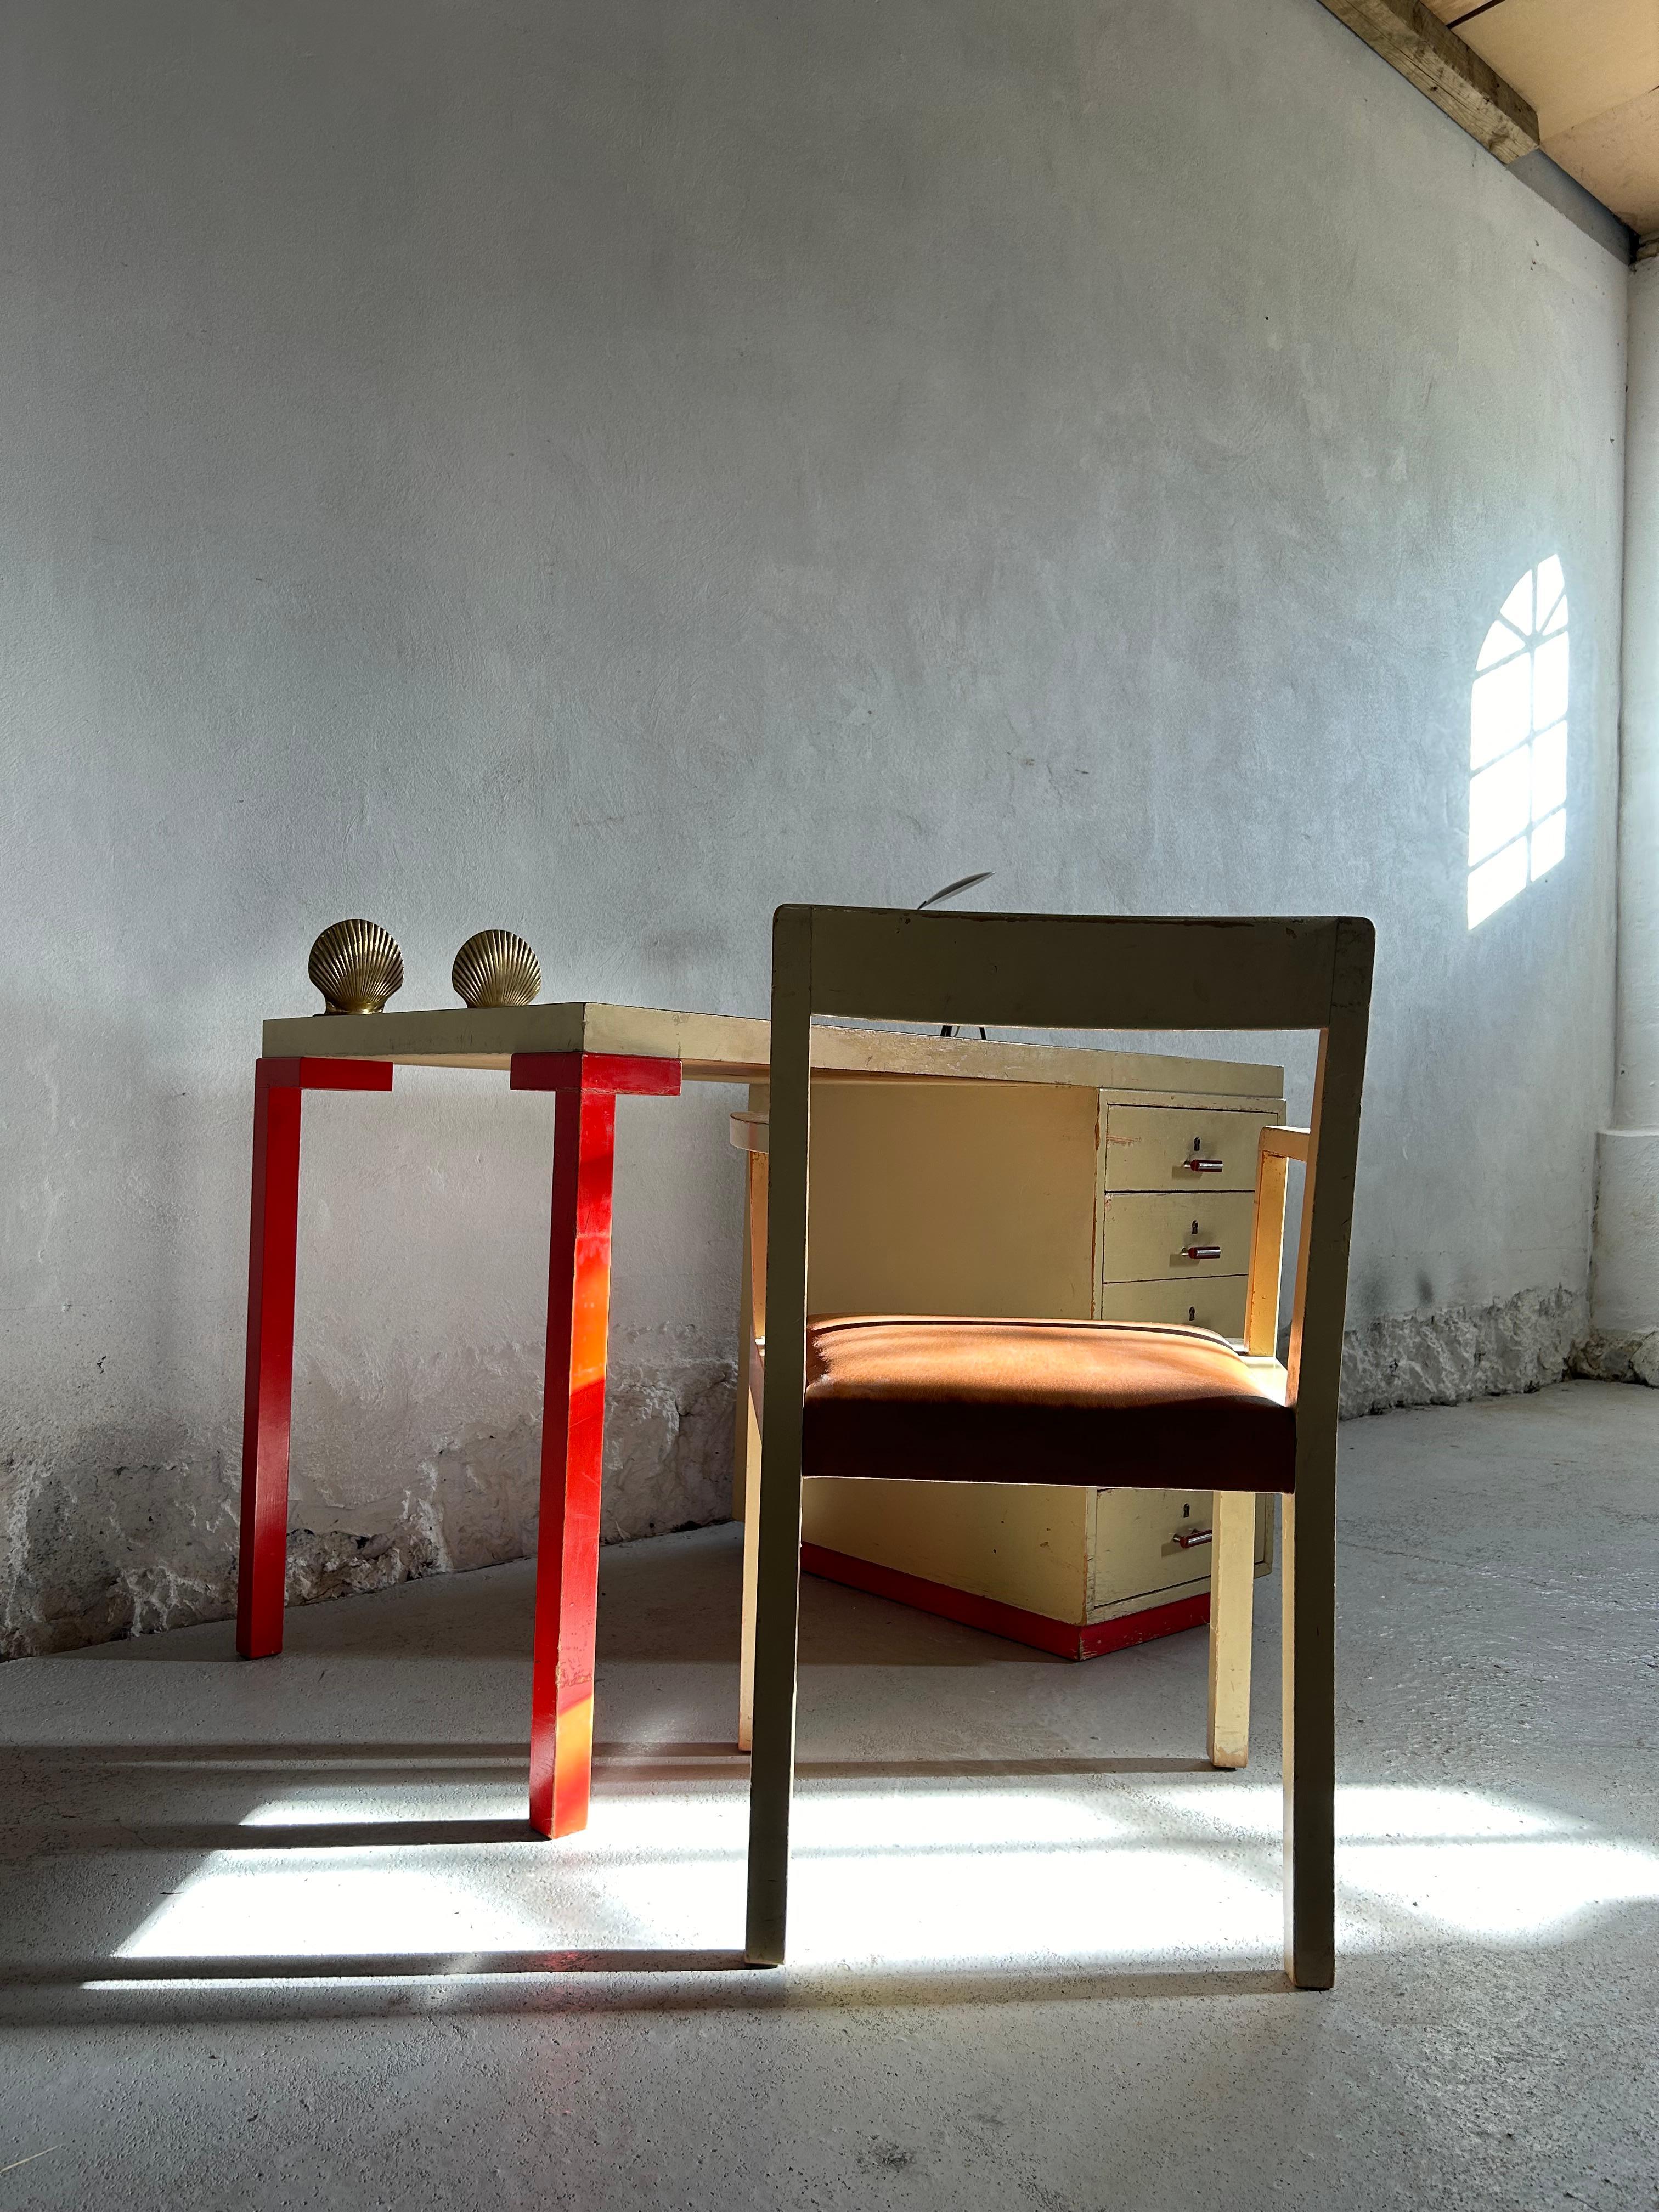 Rare and important Axel Einar Hjorth desk and armchair from the Sibylla series in the original white and red lacquer, the chair has the original white lacquer and has been reupholstered in natural colored Niger goat leather by a Danish